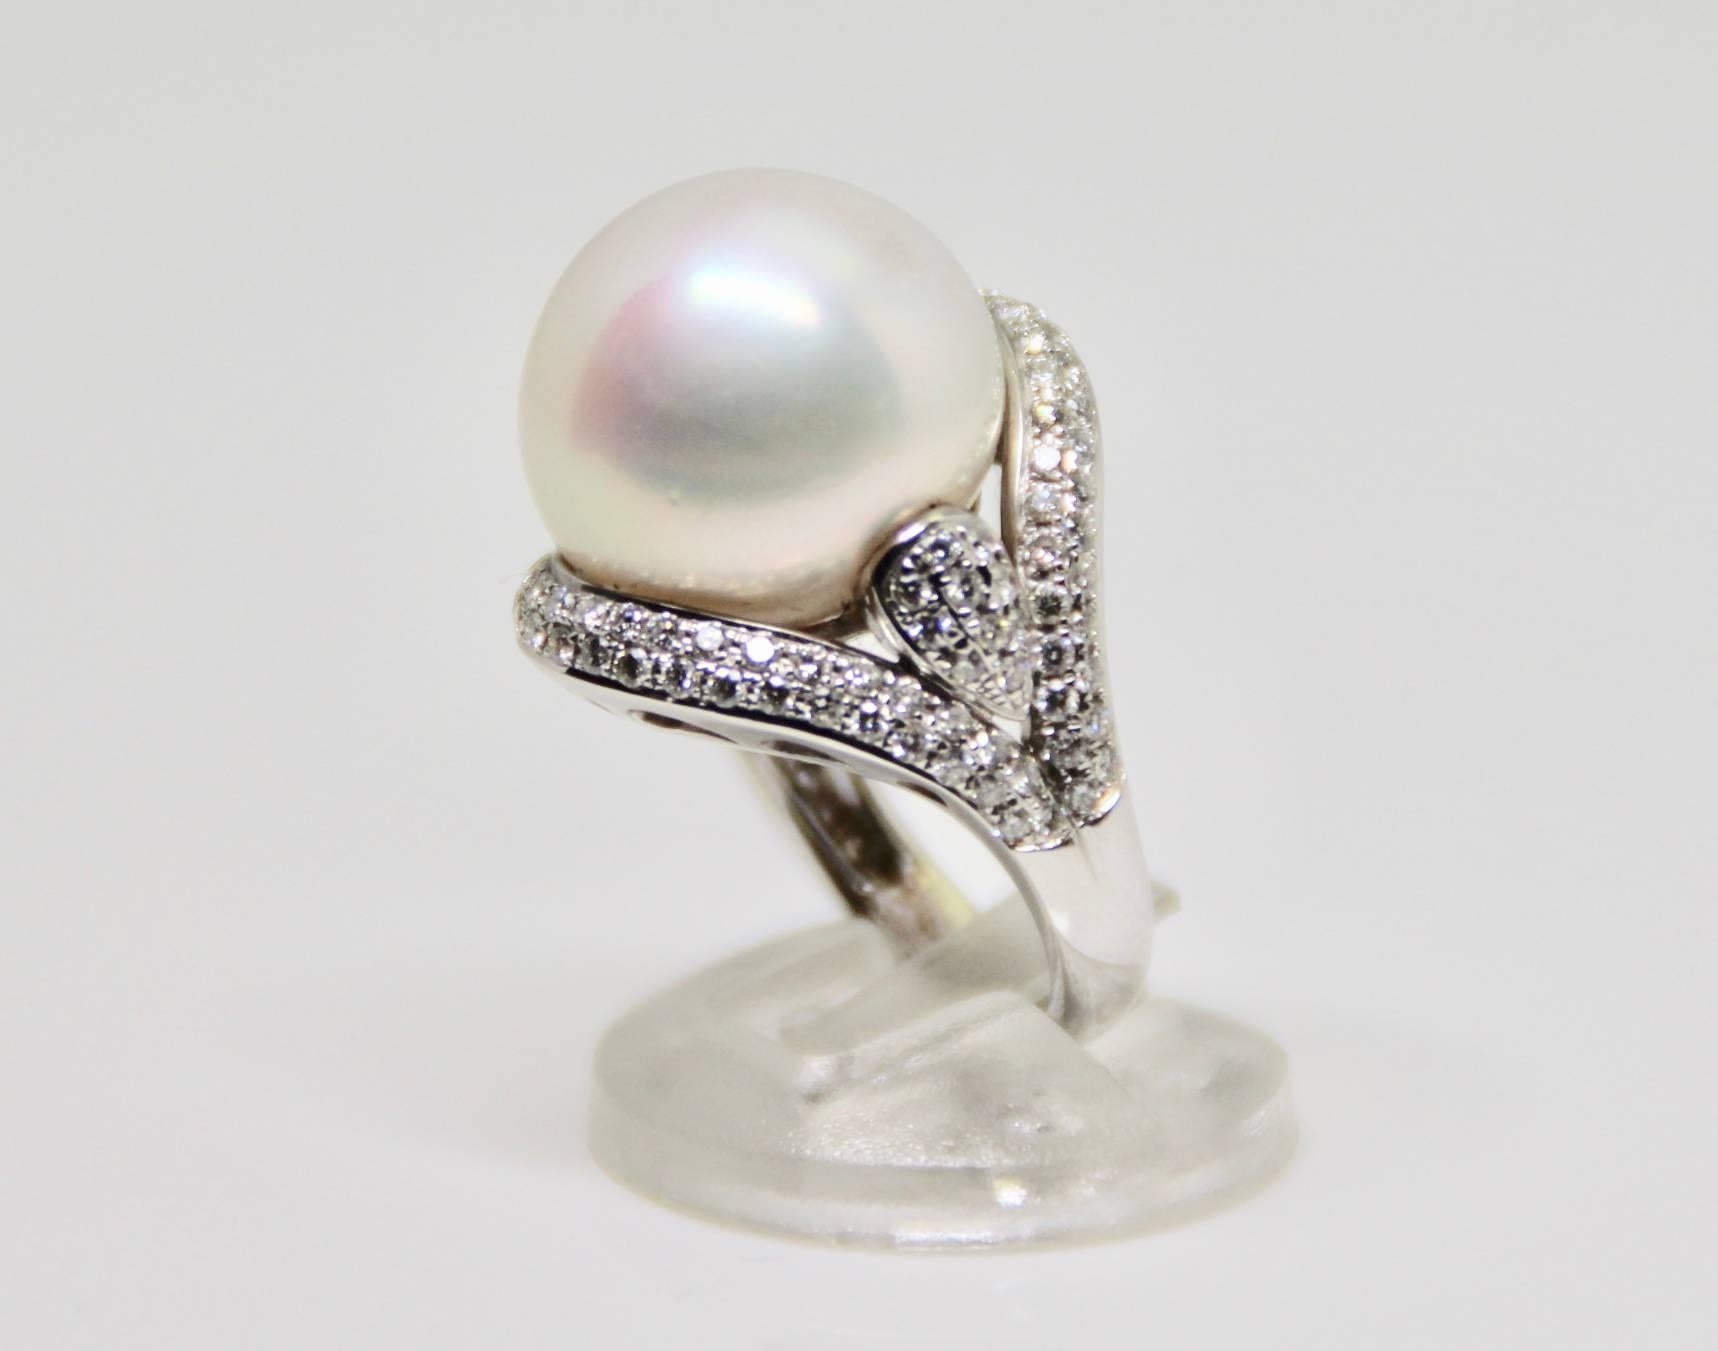 This magnificent cocktail or dress ring with a 18mm rosé south sea pearl is set in white gold, and surrounded by fine white diamonds. The skin and lustre of the pearl looks beautiful in the night or day.